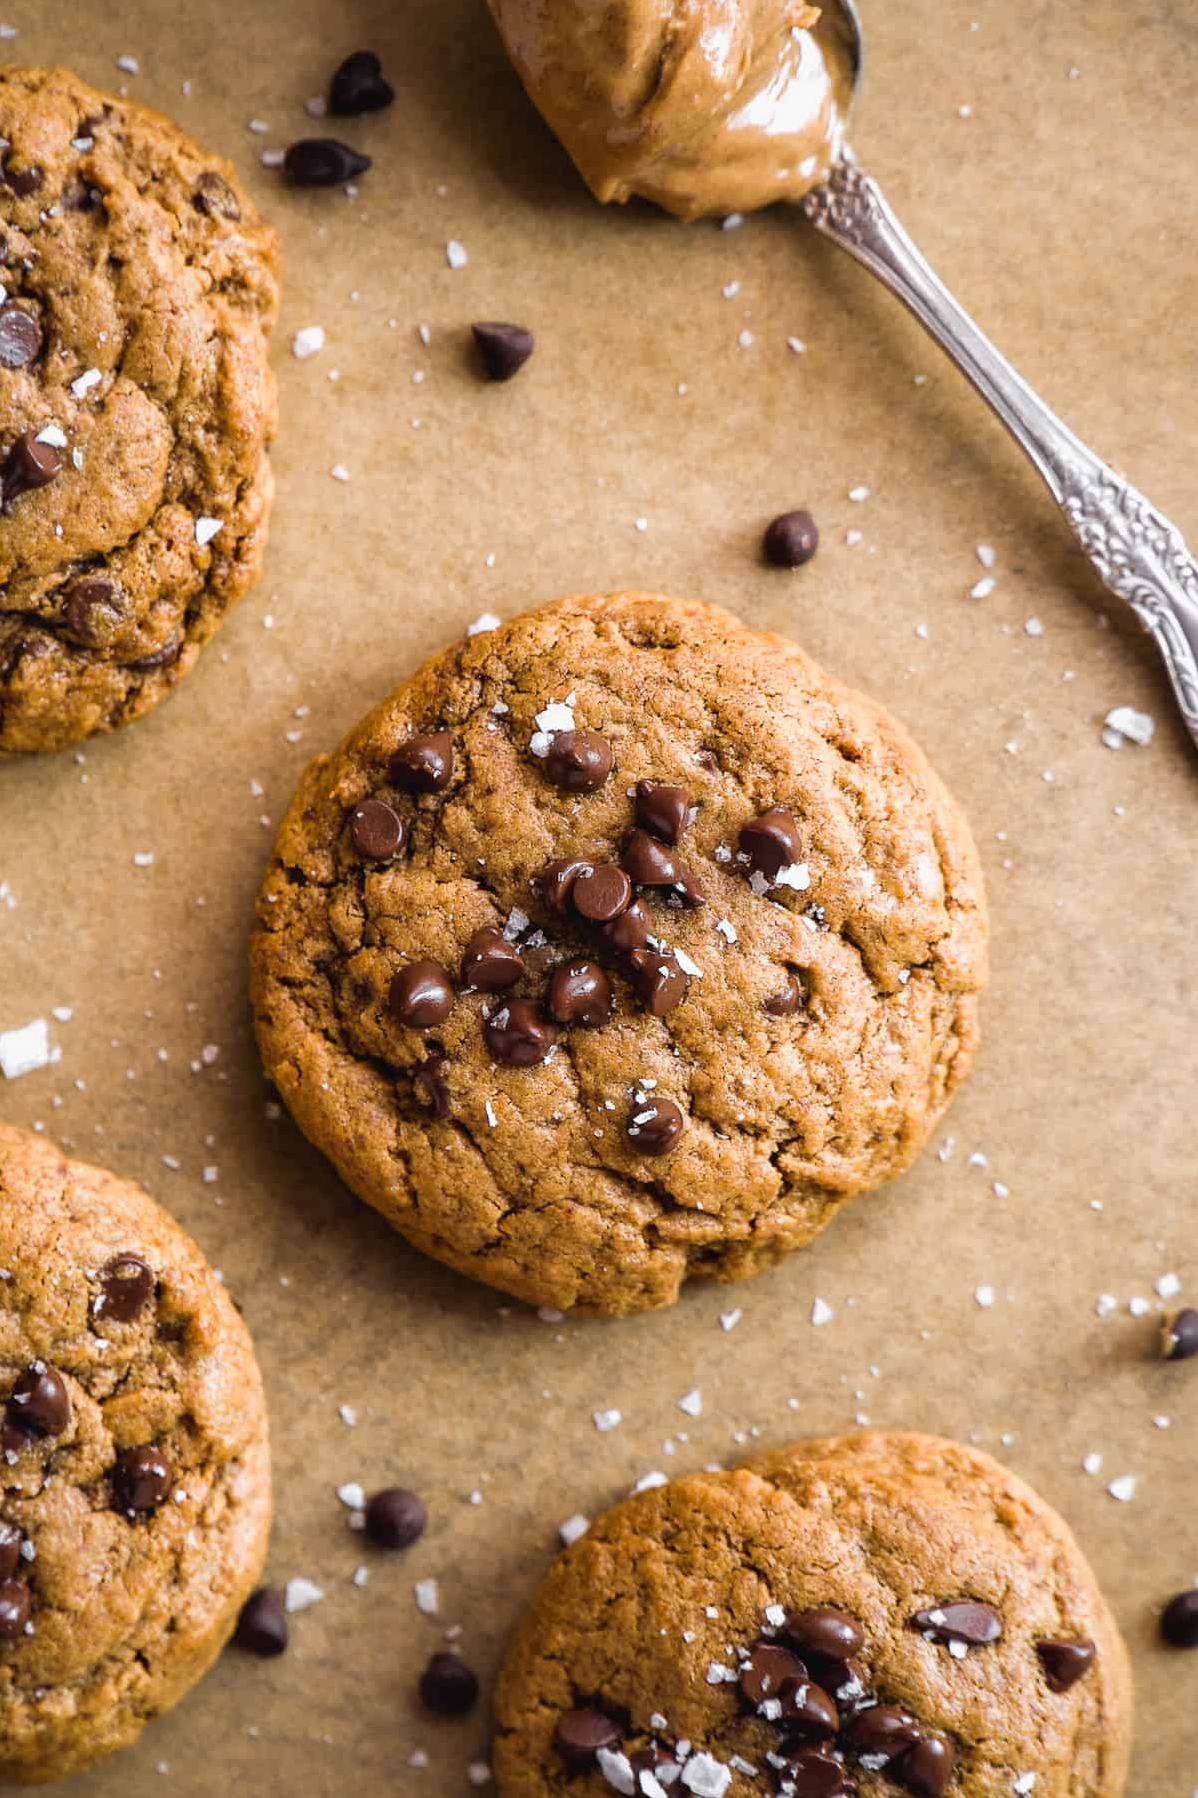  No need for a glass of milk! These cookies are dairy-free and made from simple, wholesome ingredients